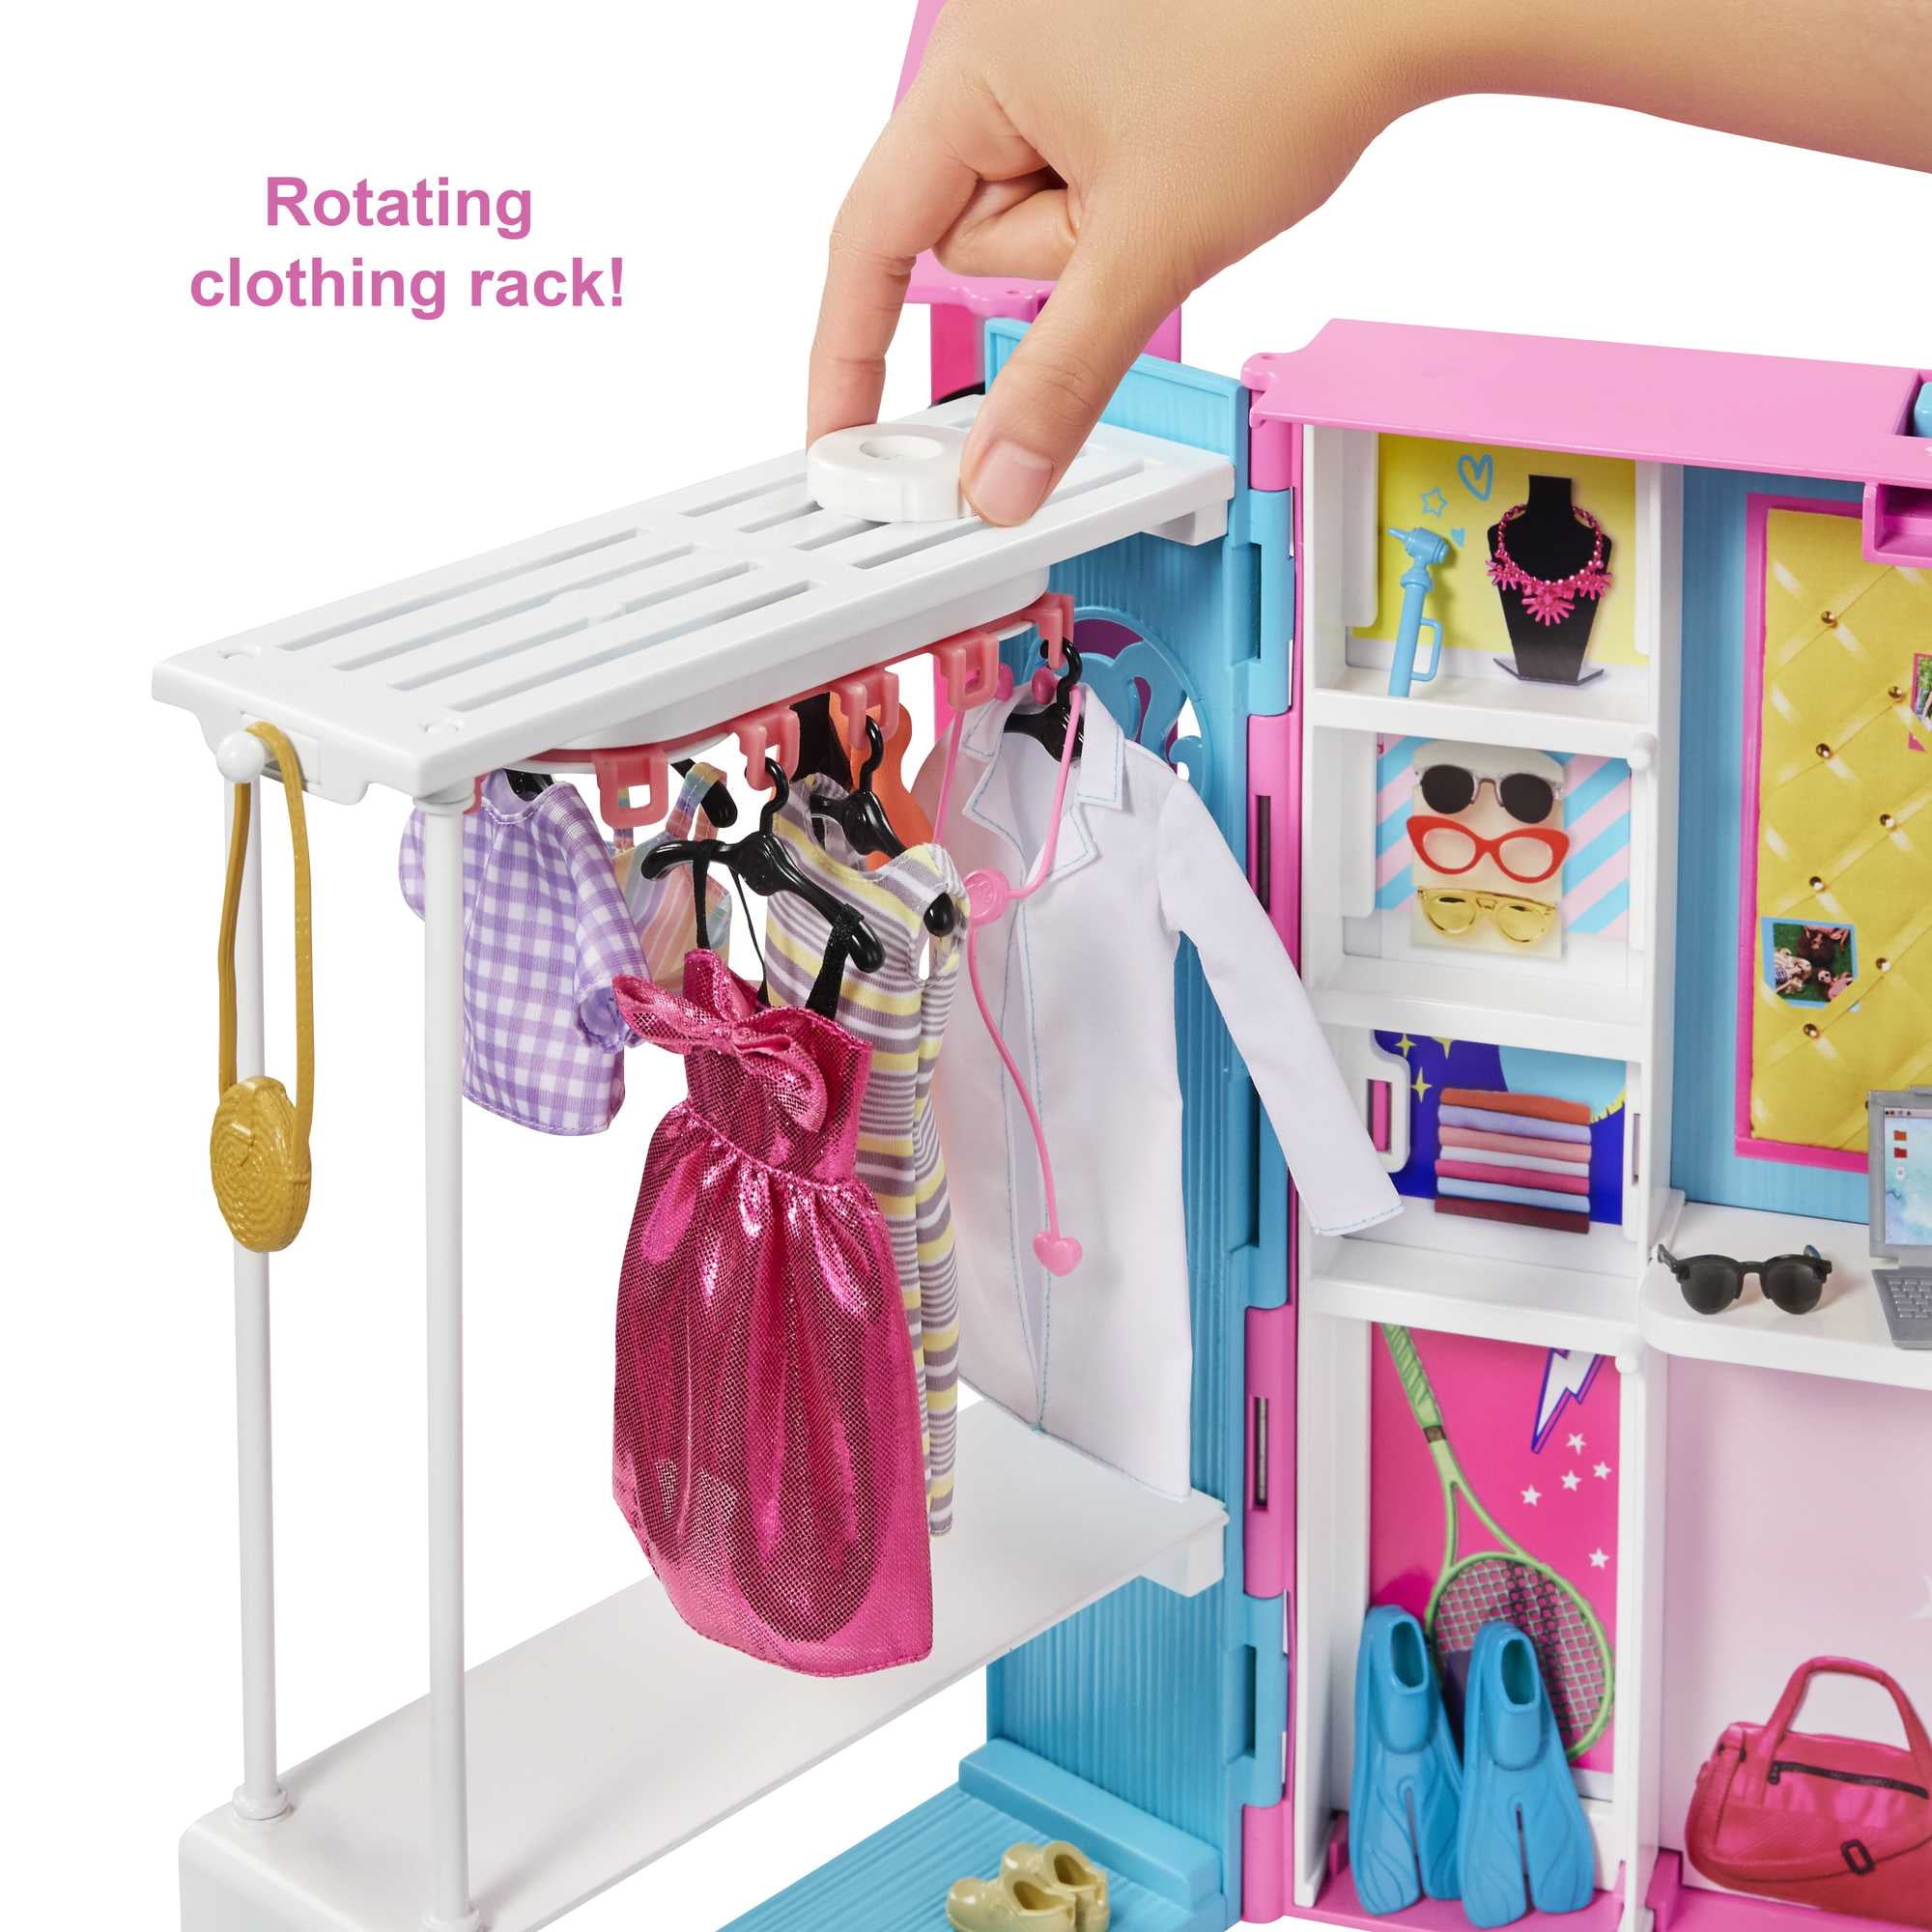 Barbie® Dream Closet Doll and Playset by Mattel